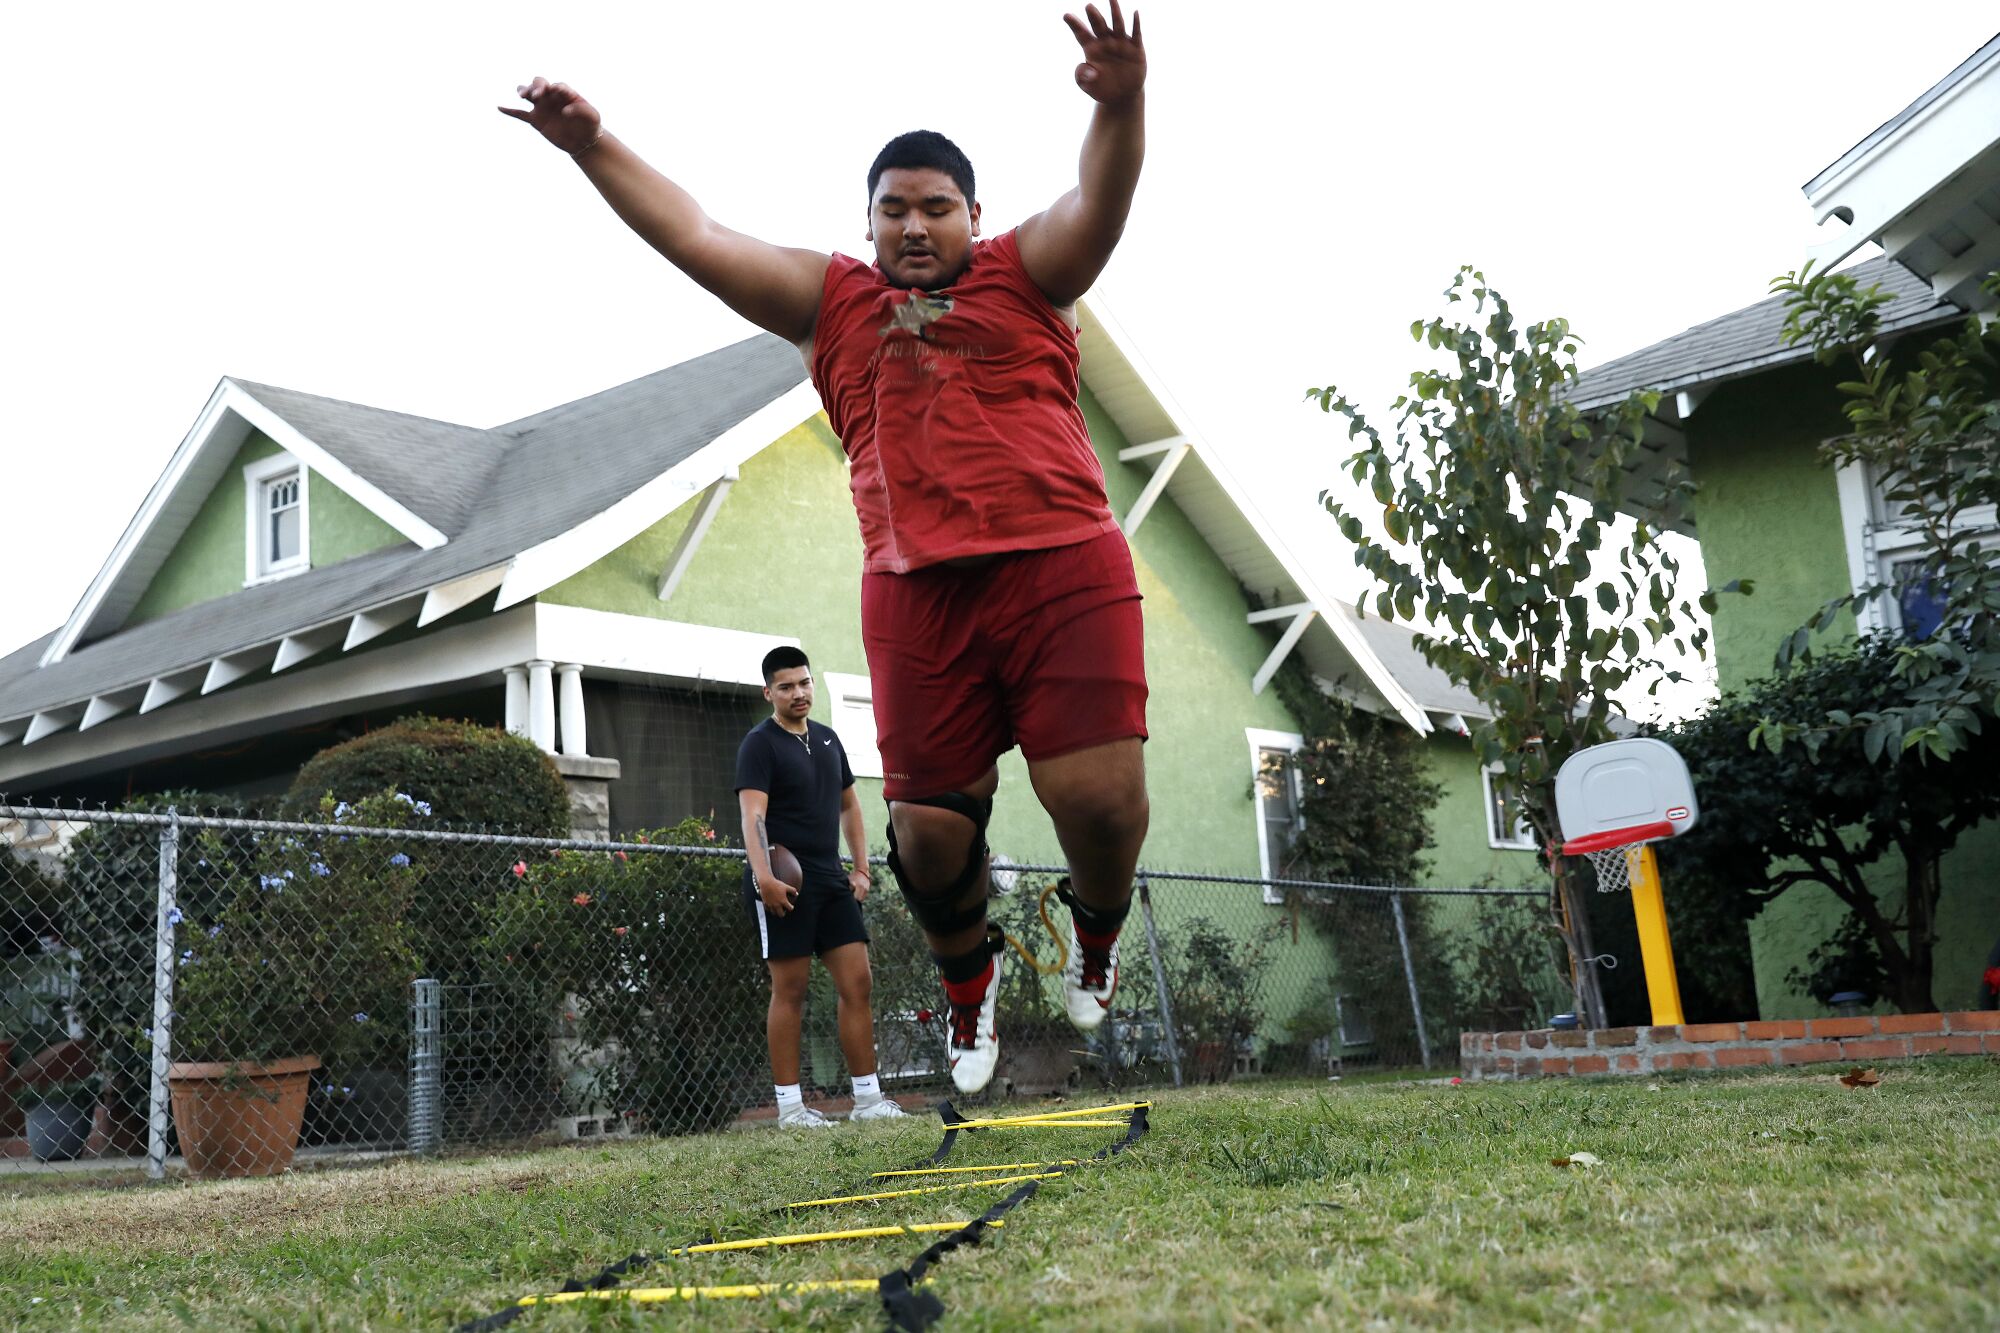 East L.A. Roosevelt players Benjamin Reyes, foreground, and Damian Avalos do a remote team workout.